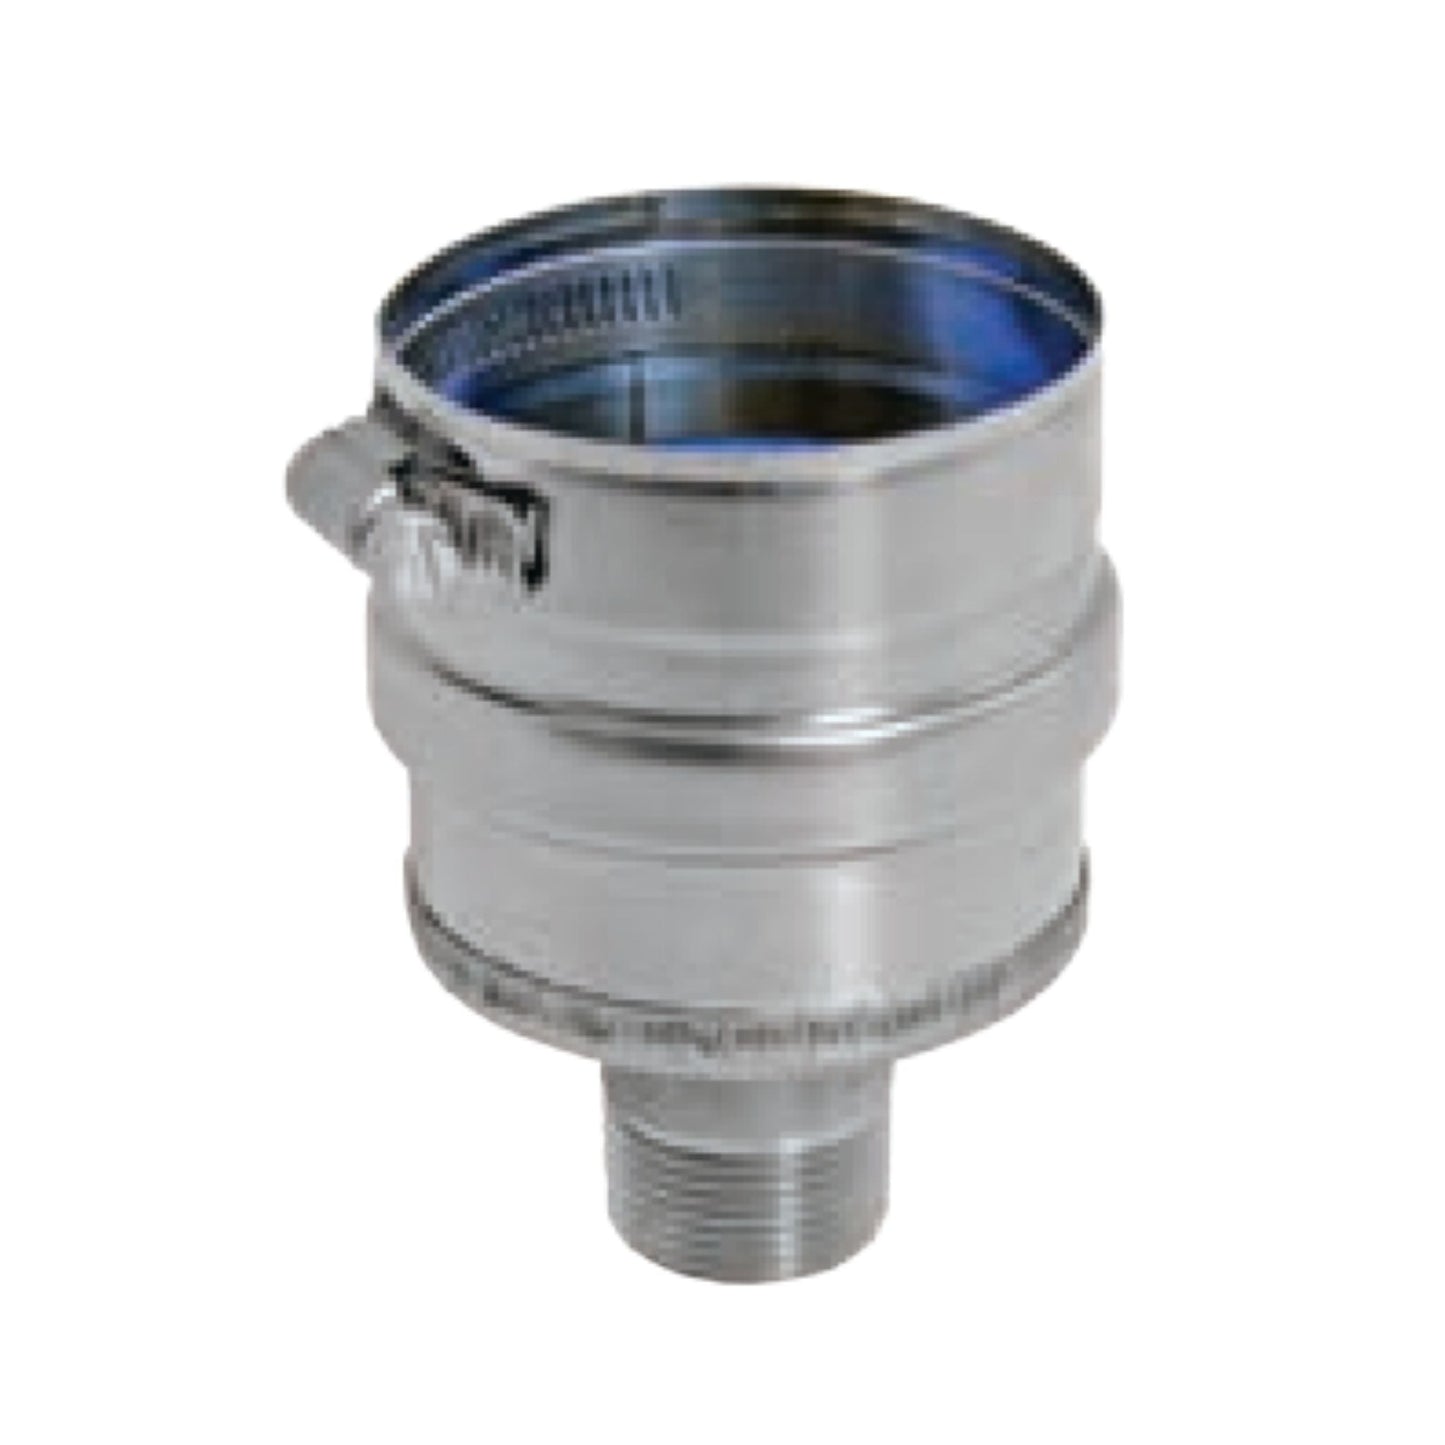 DuraVent FasNSeal 6" 29-4C Stainless Steel IPS Drain Fitting